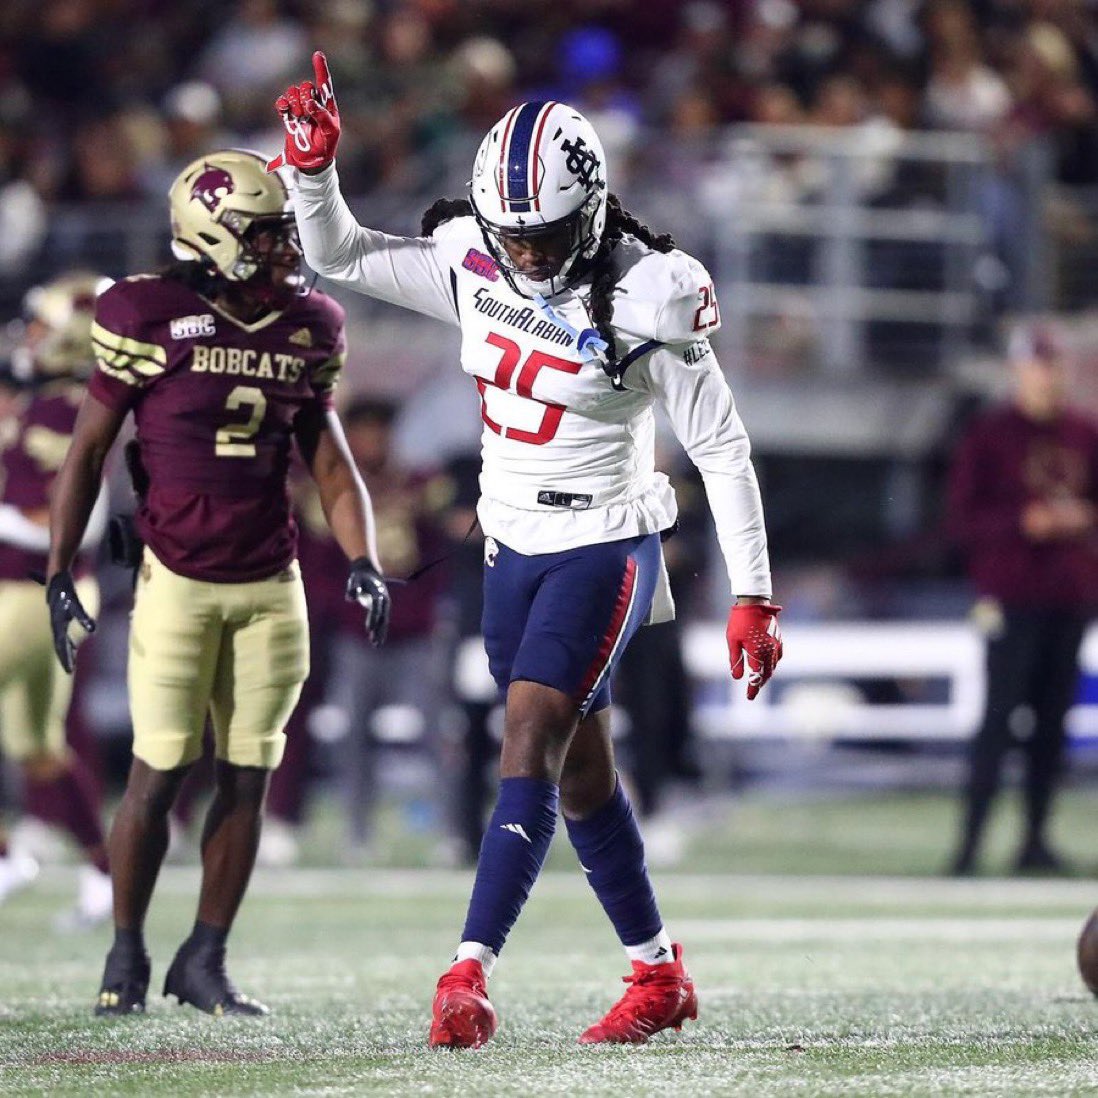 South Alabama linebacker Khalil Jacobs tells @On3sports he is headed to Ole Miss tonight for a visit. He tallied 56 tackles, 8.5 TFL, 3 forced fumbles and an INT in 2023. More: on3.com/college/ole-mi…